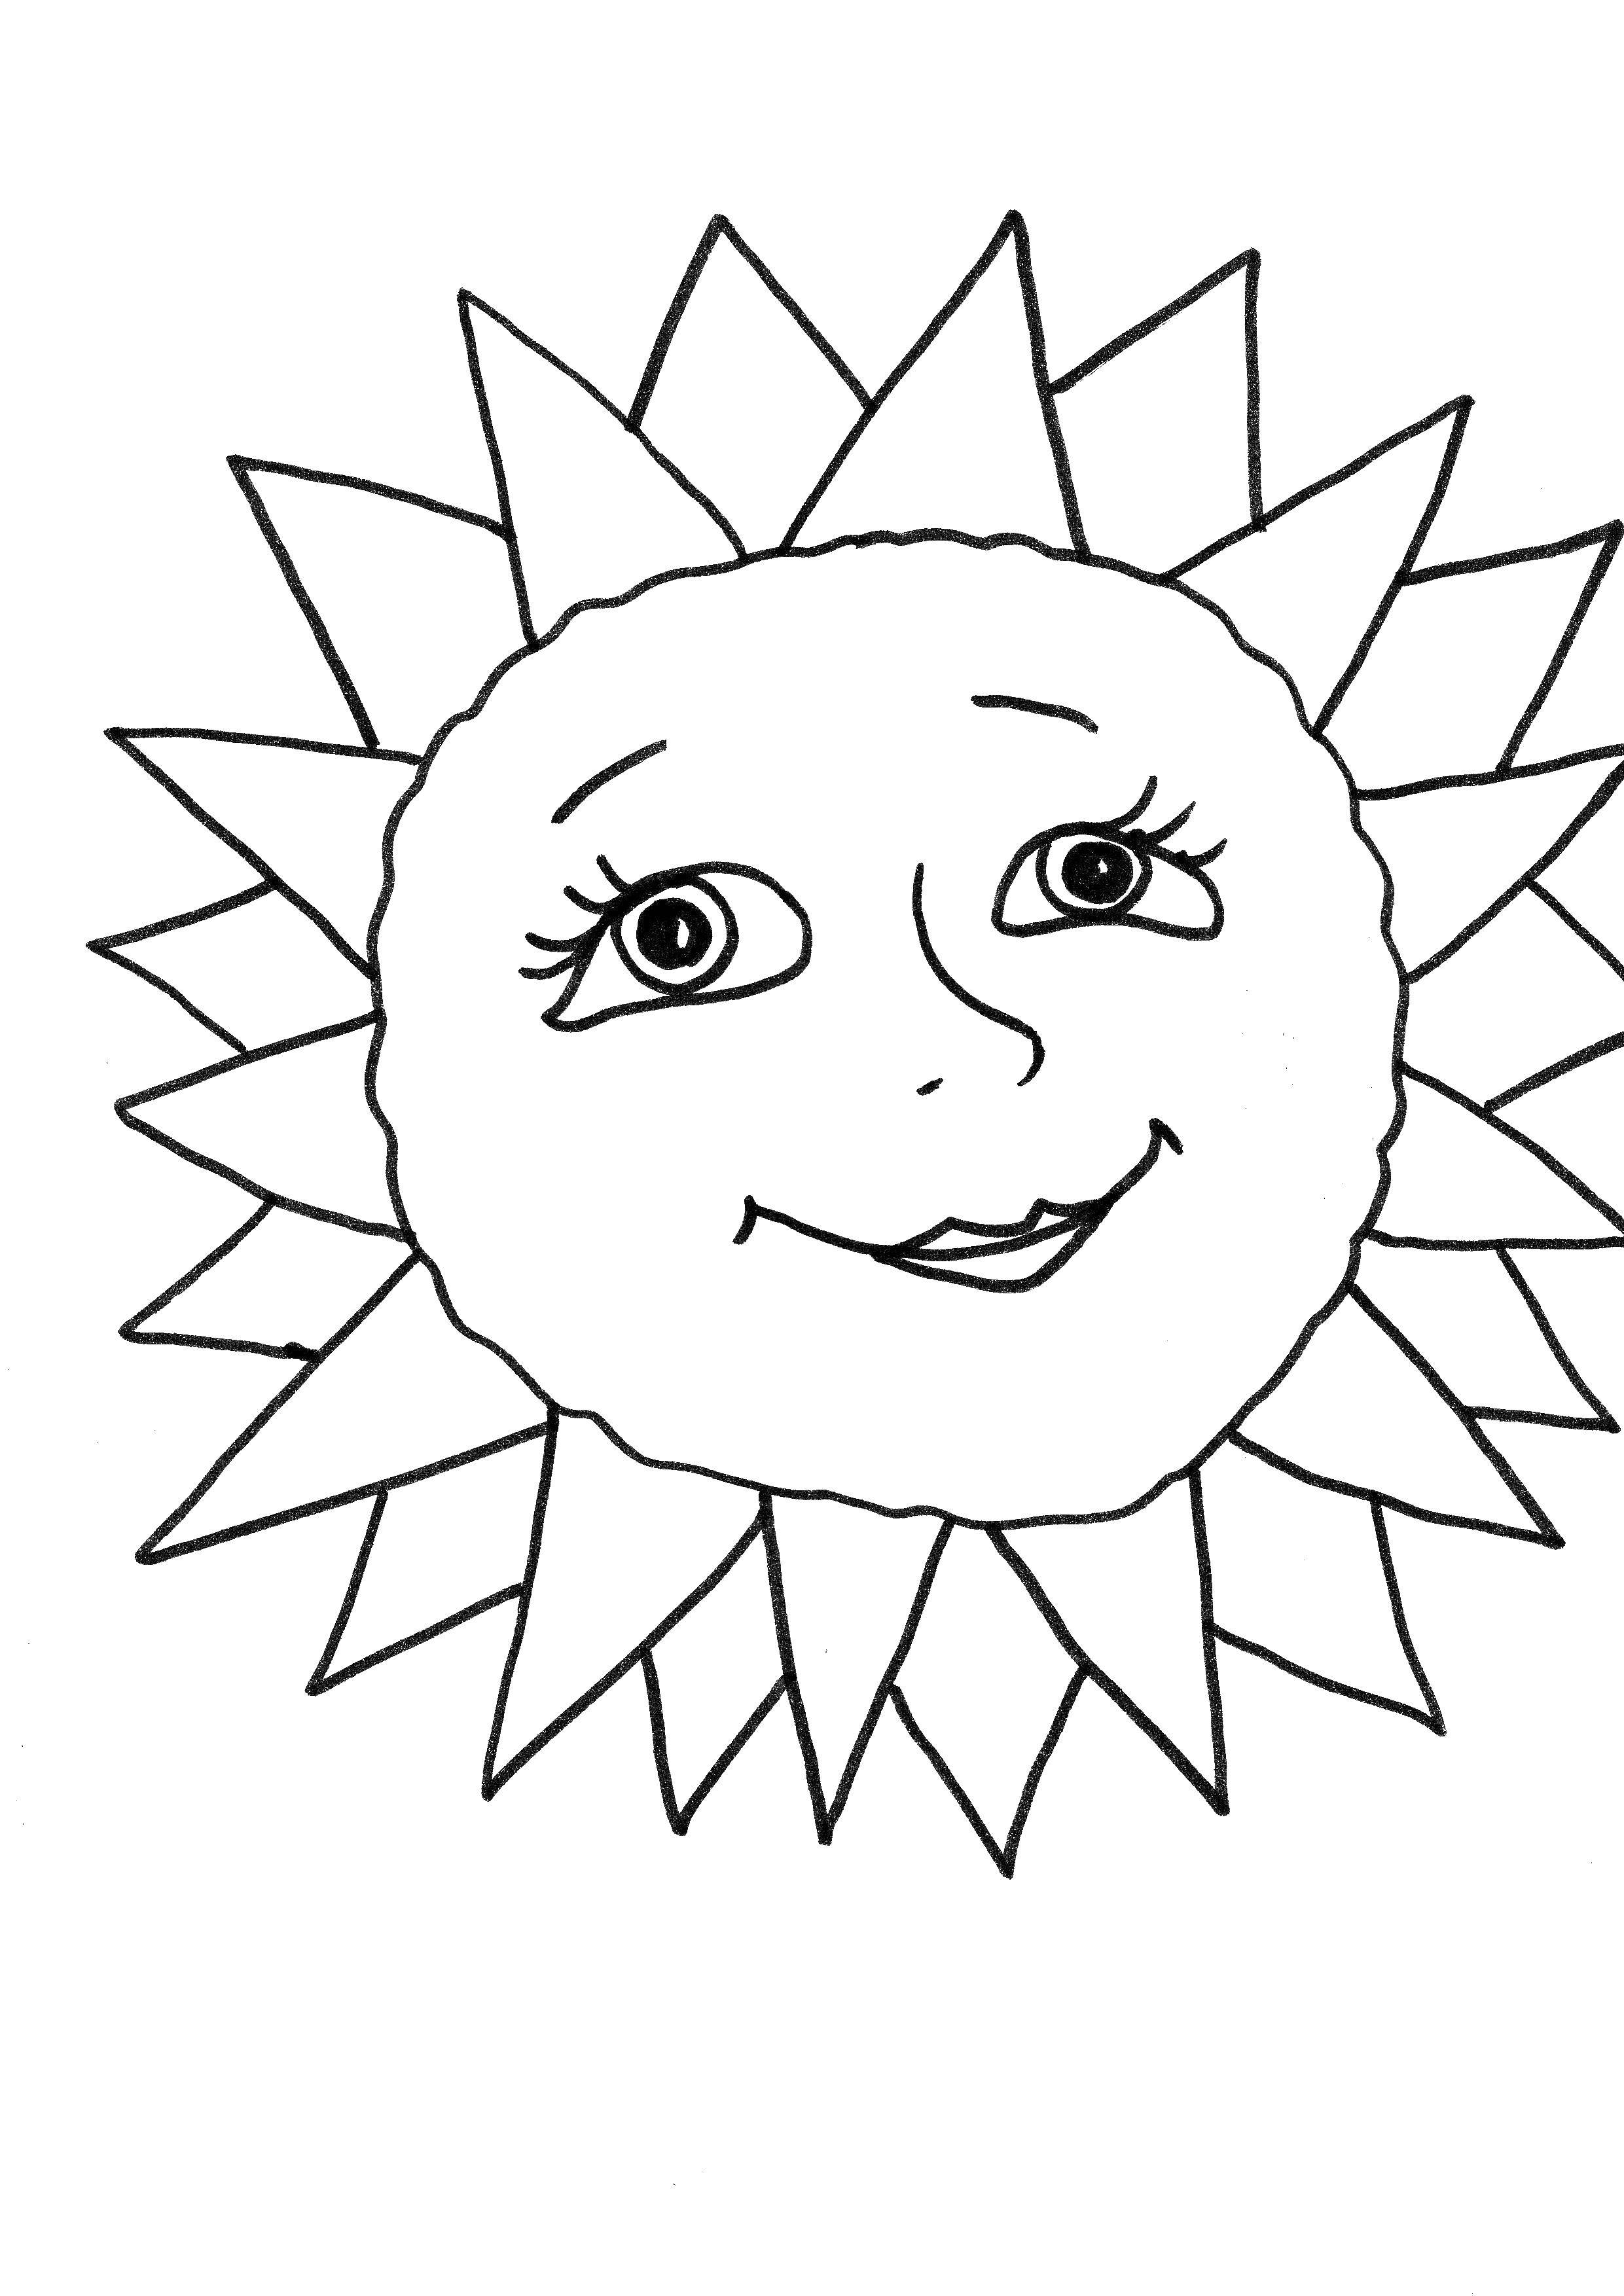 Coloring The sun is smiling. Category little ones. Tags:  Sun, rays, joy.